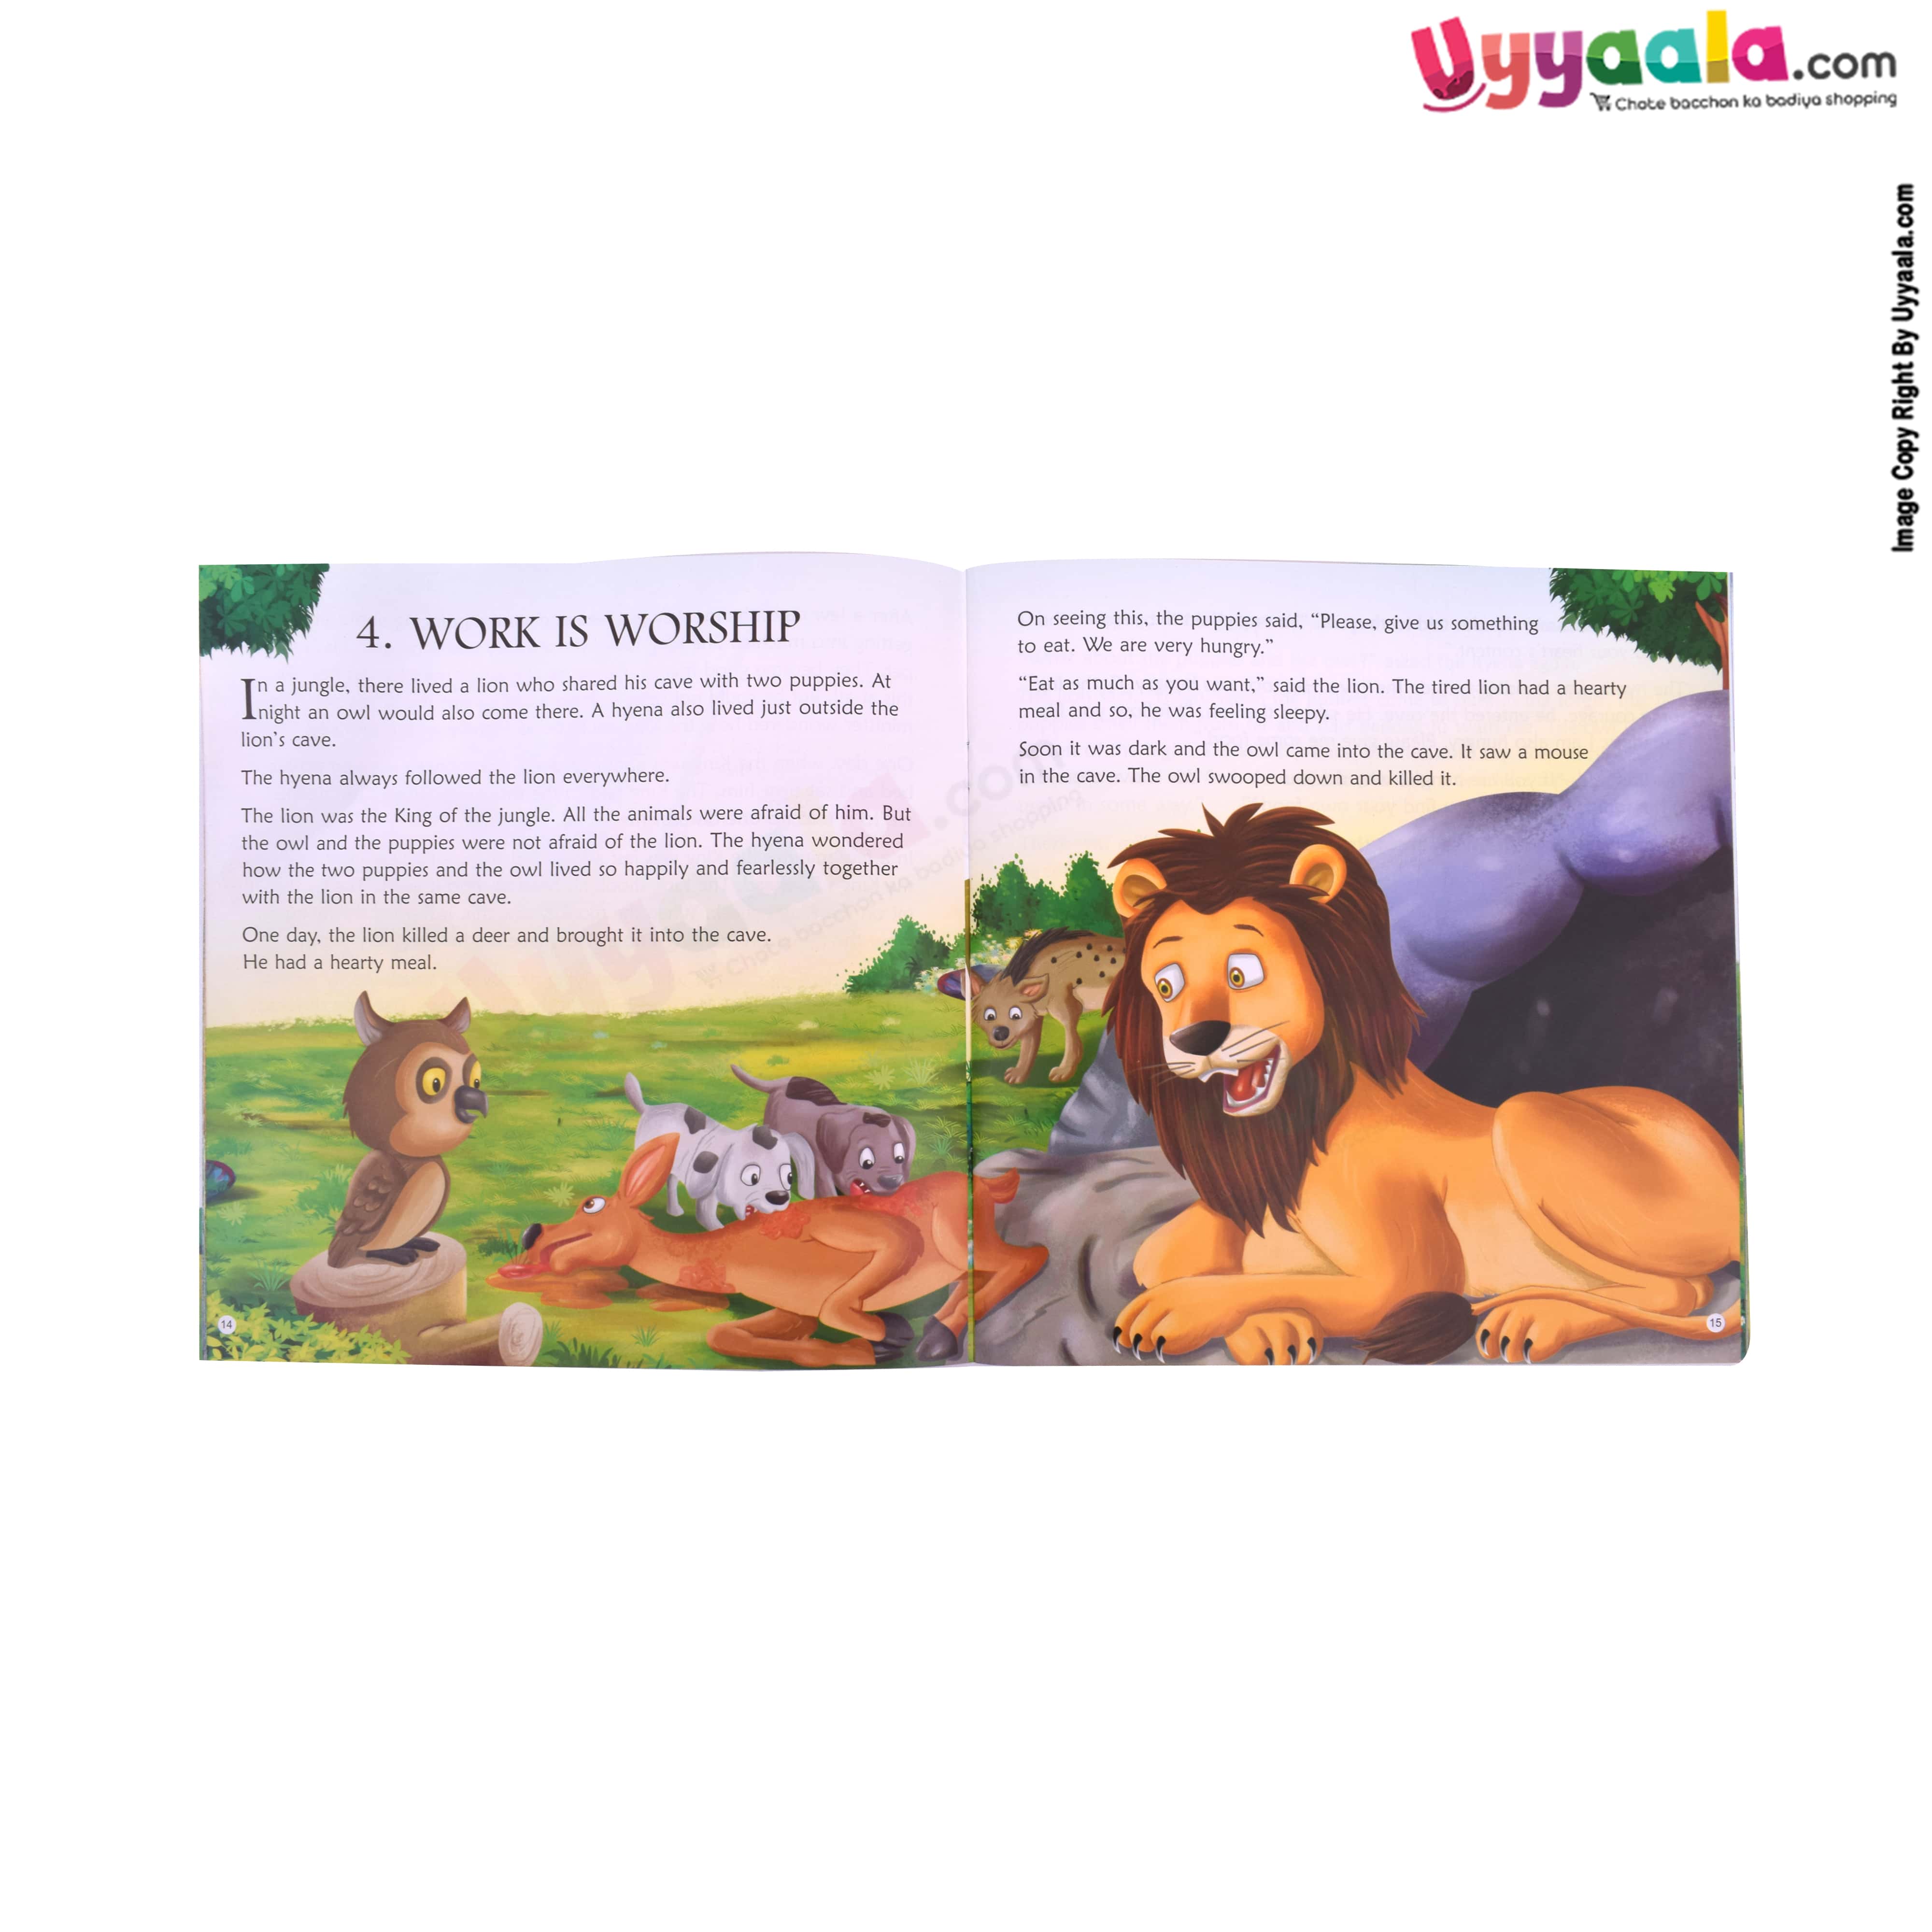 NAVNEET any time tales stories for children, my bed time stories pack of 4